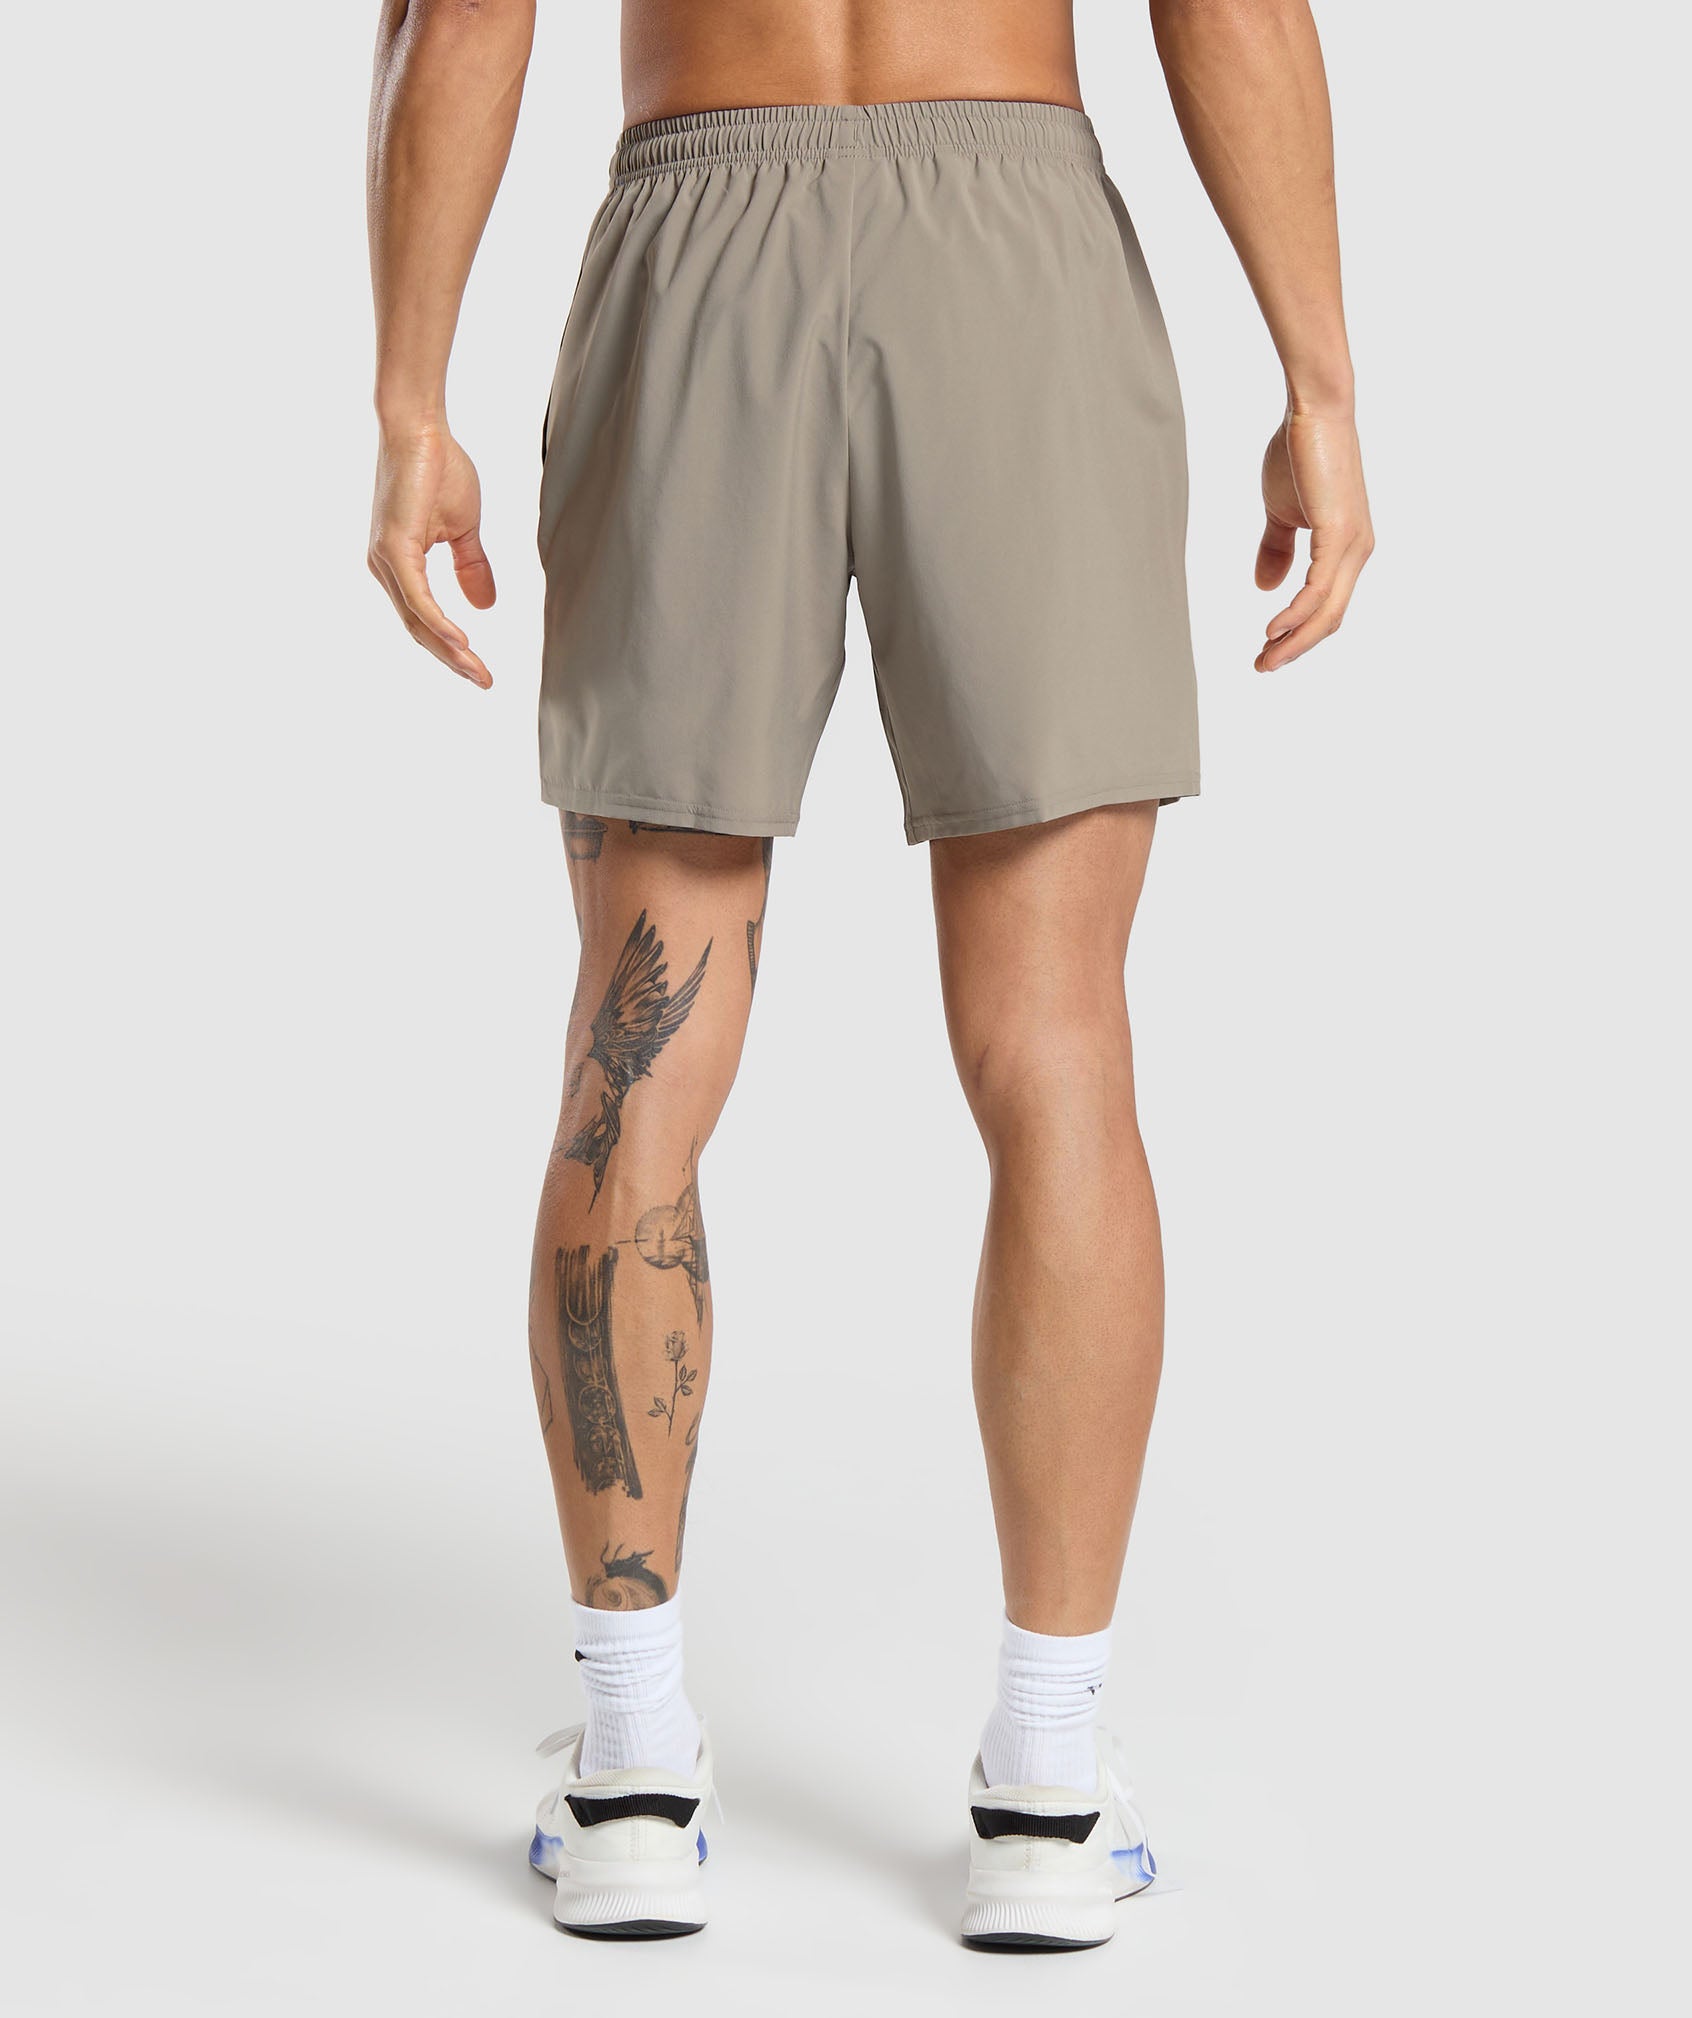 Arrival 7" Shorts in Linen Brown - view 2